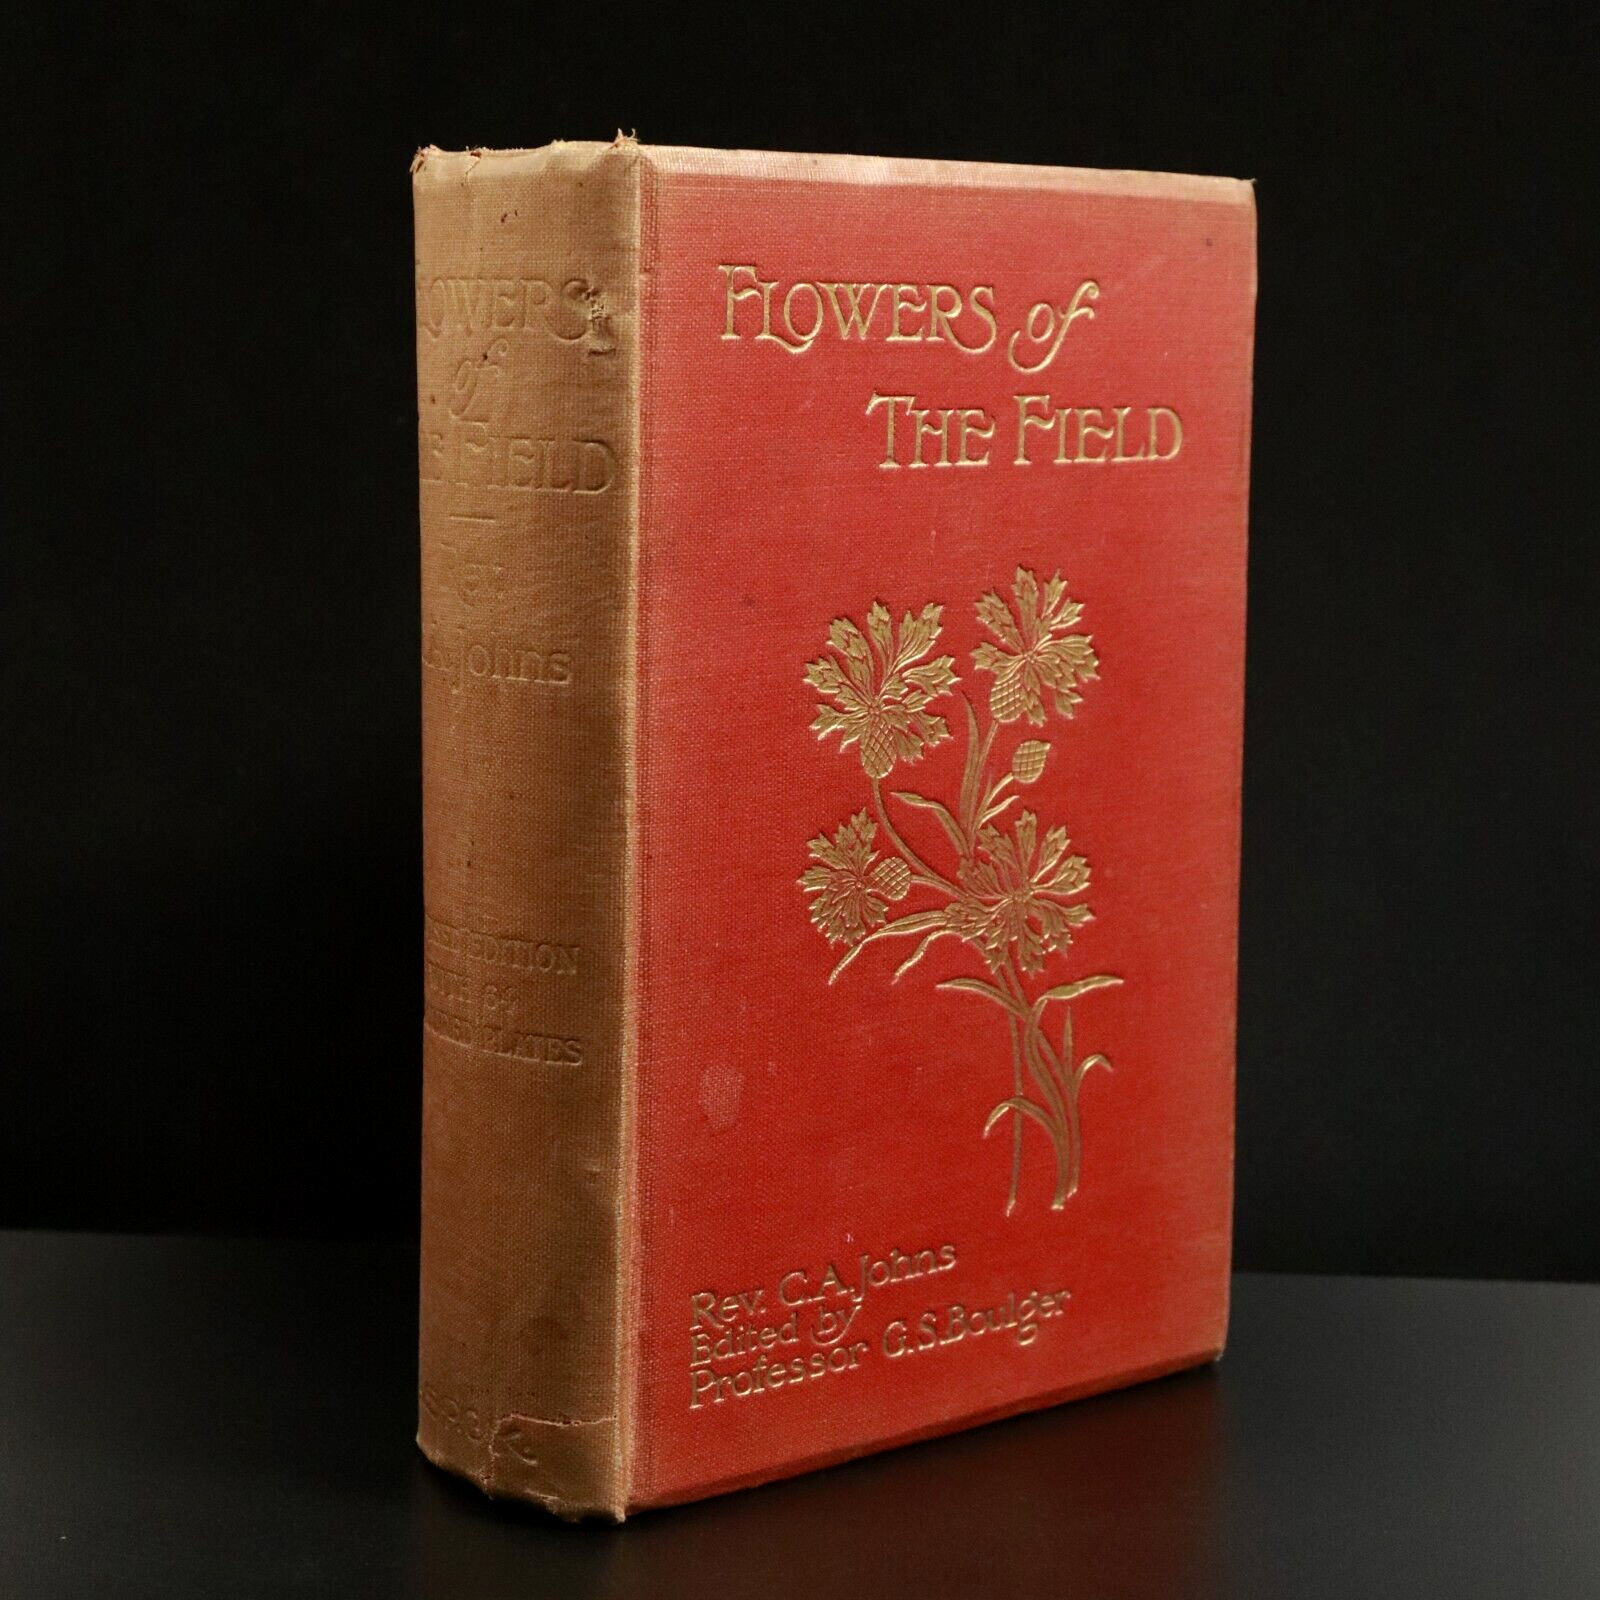 1911 Flowers Of The Field by C.A Johns Antique Flora Reference Book